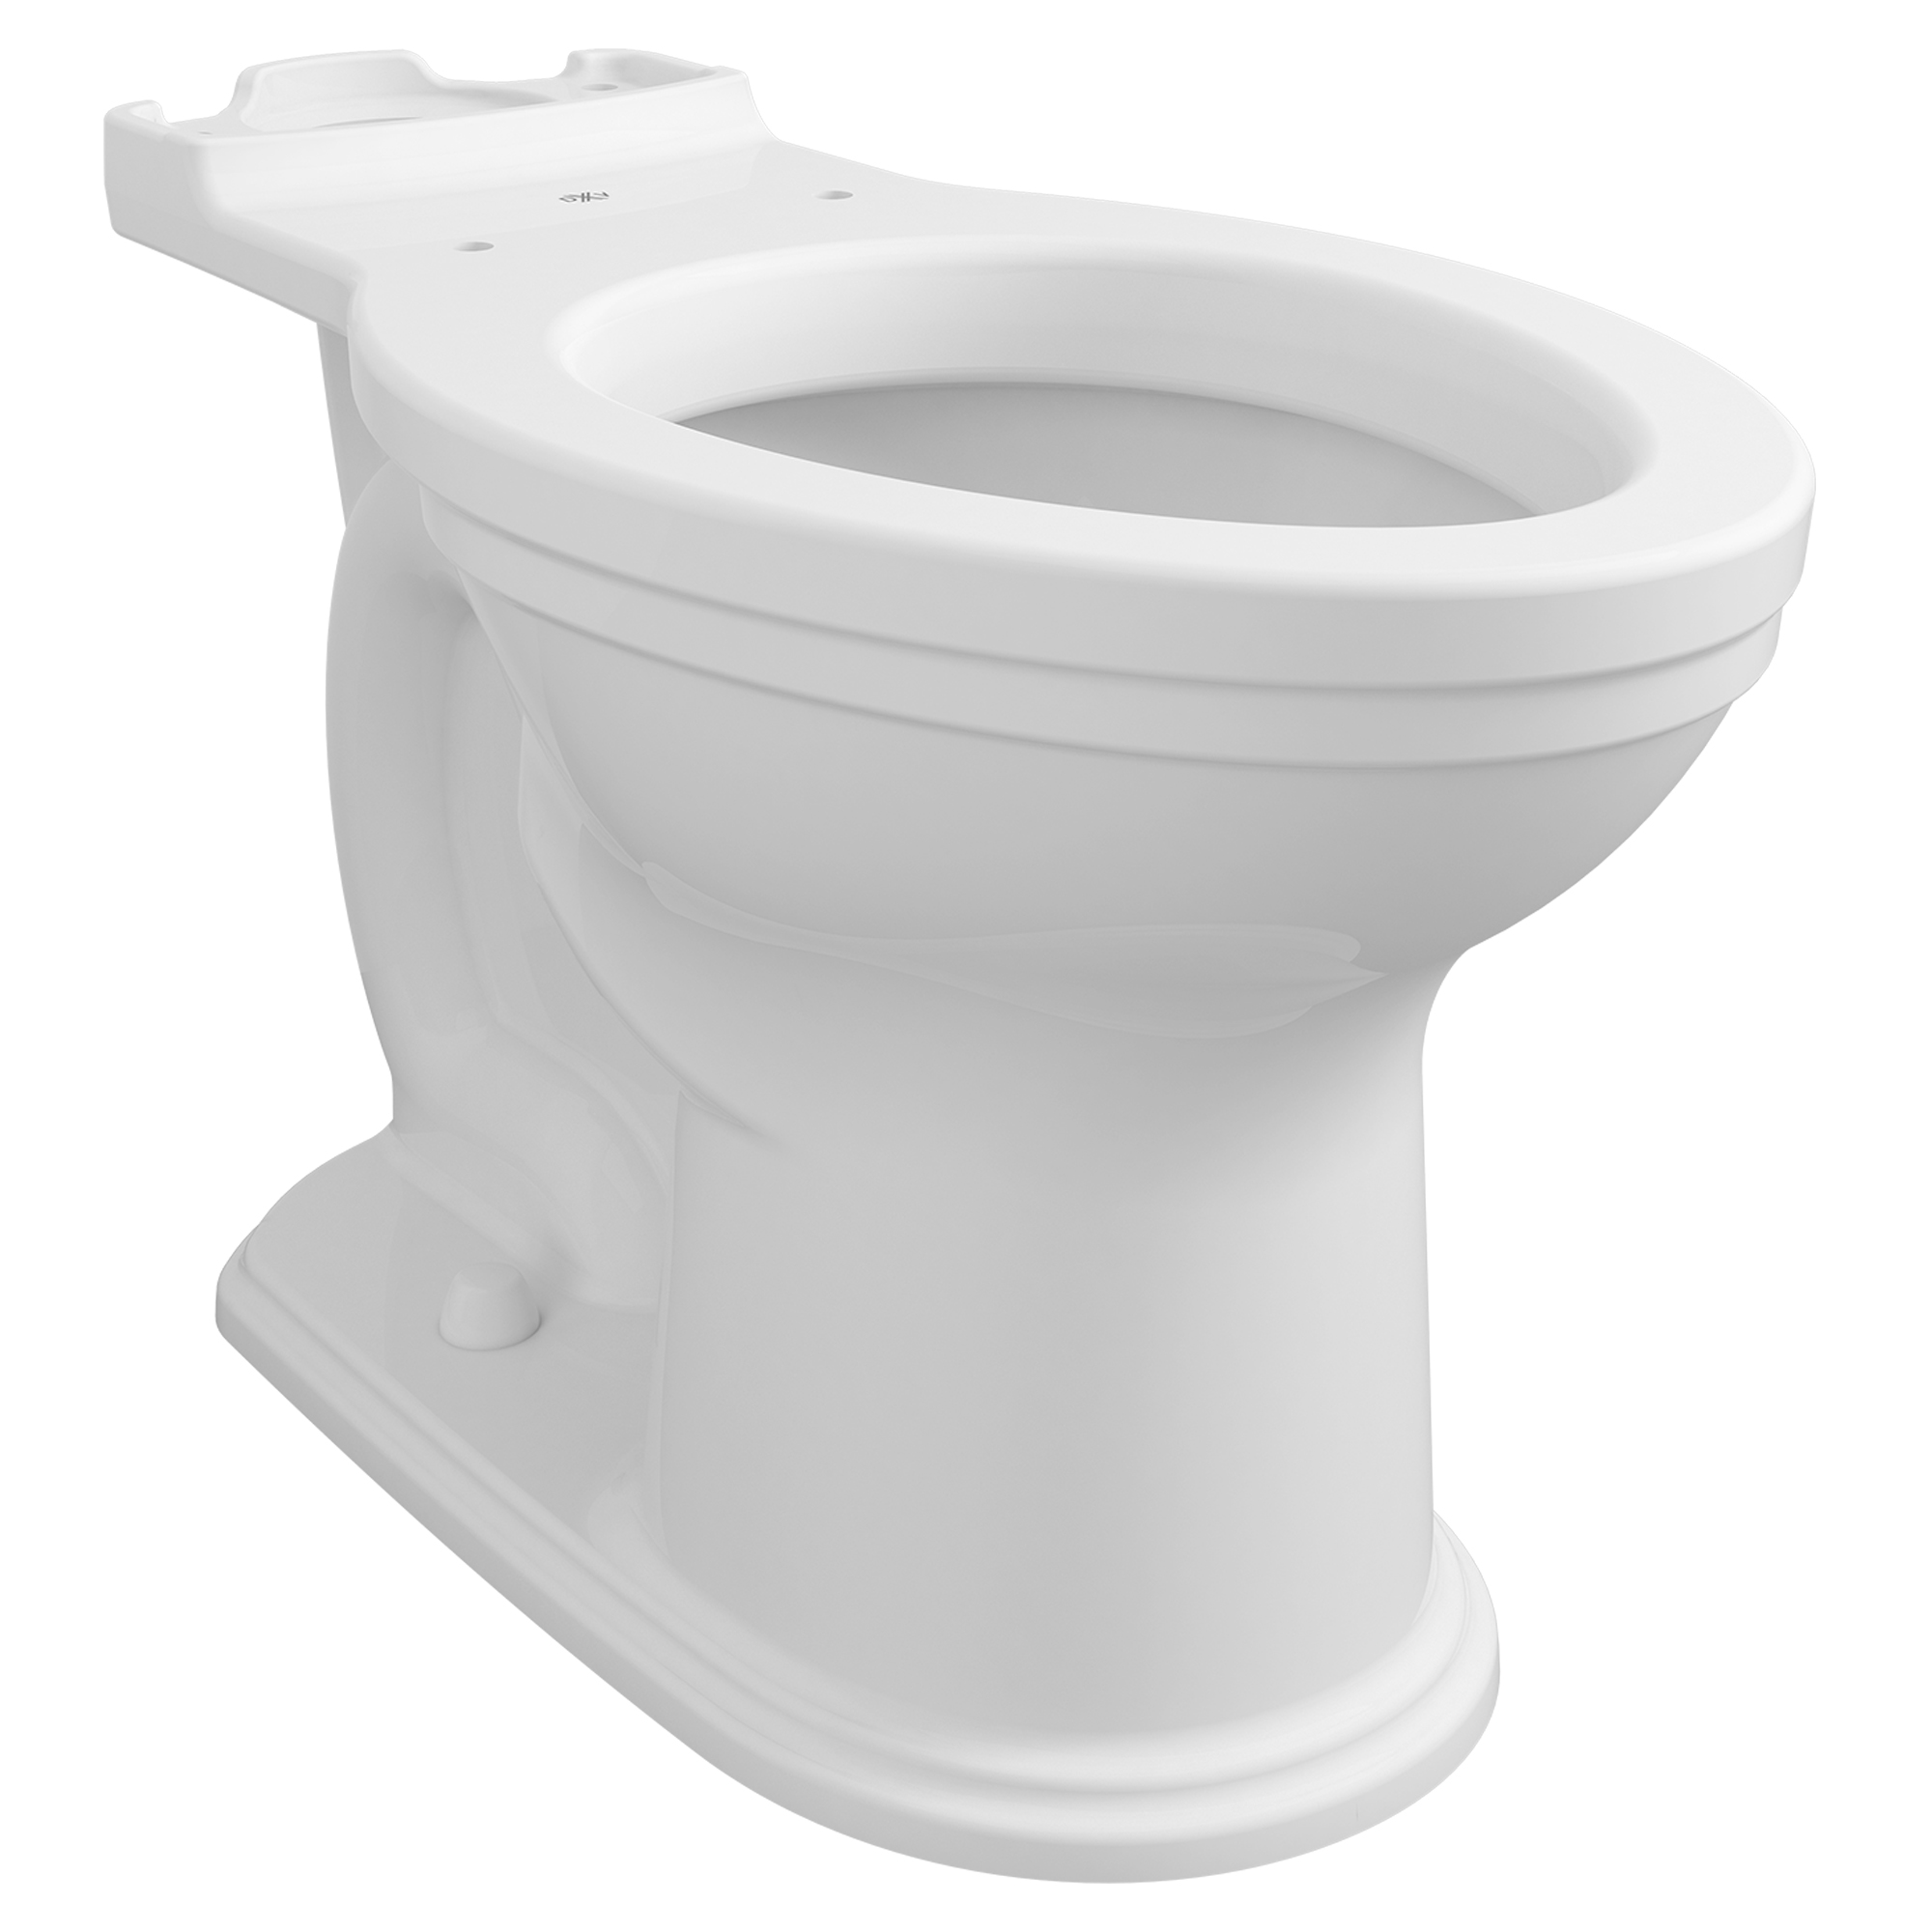 St. George Chair Height Elongated Toilet Bowl with Seat